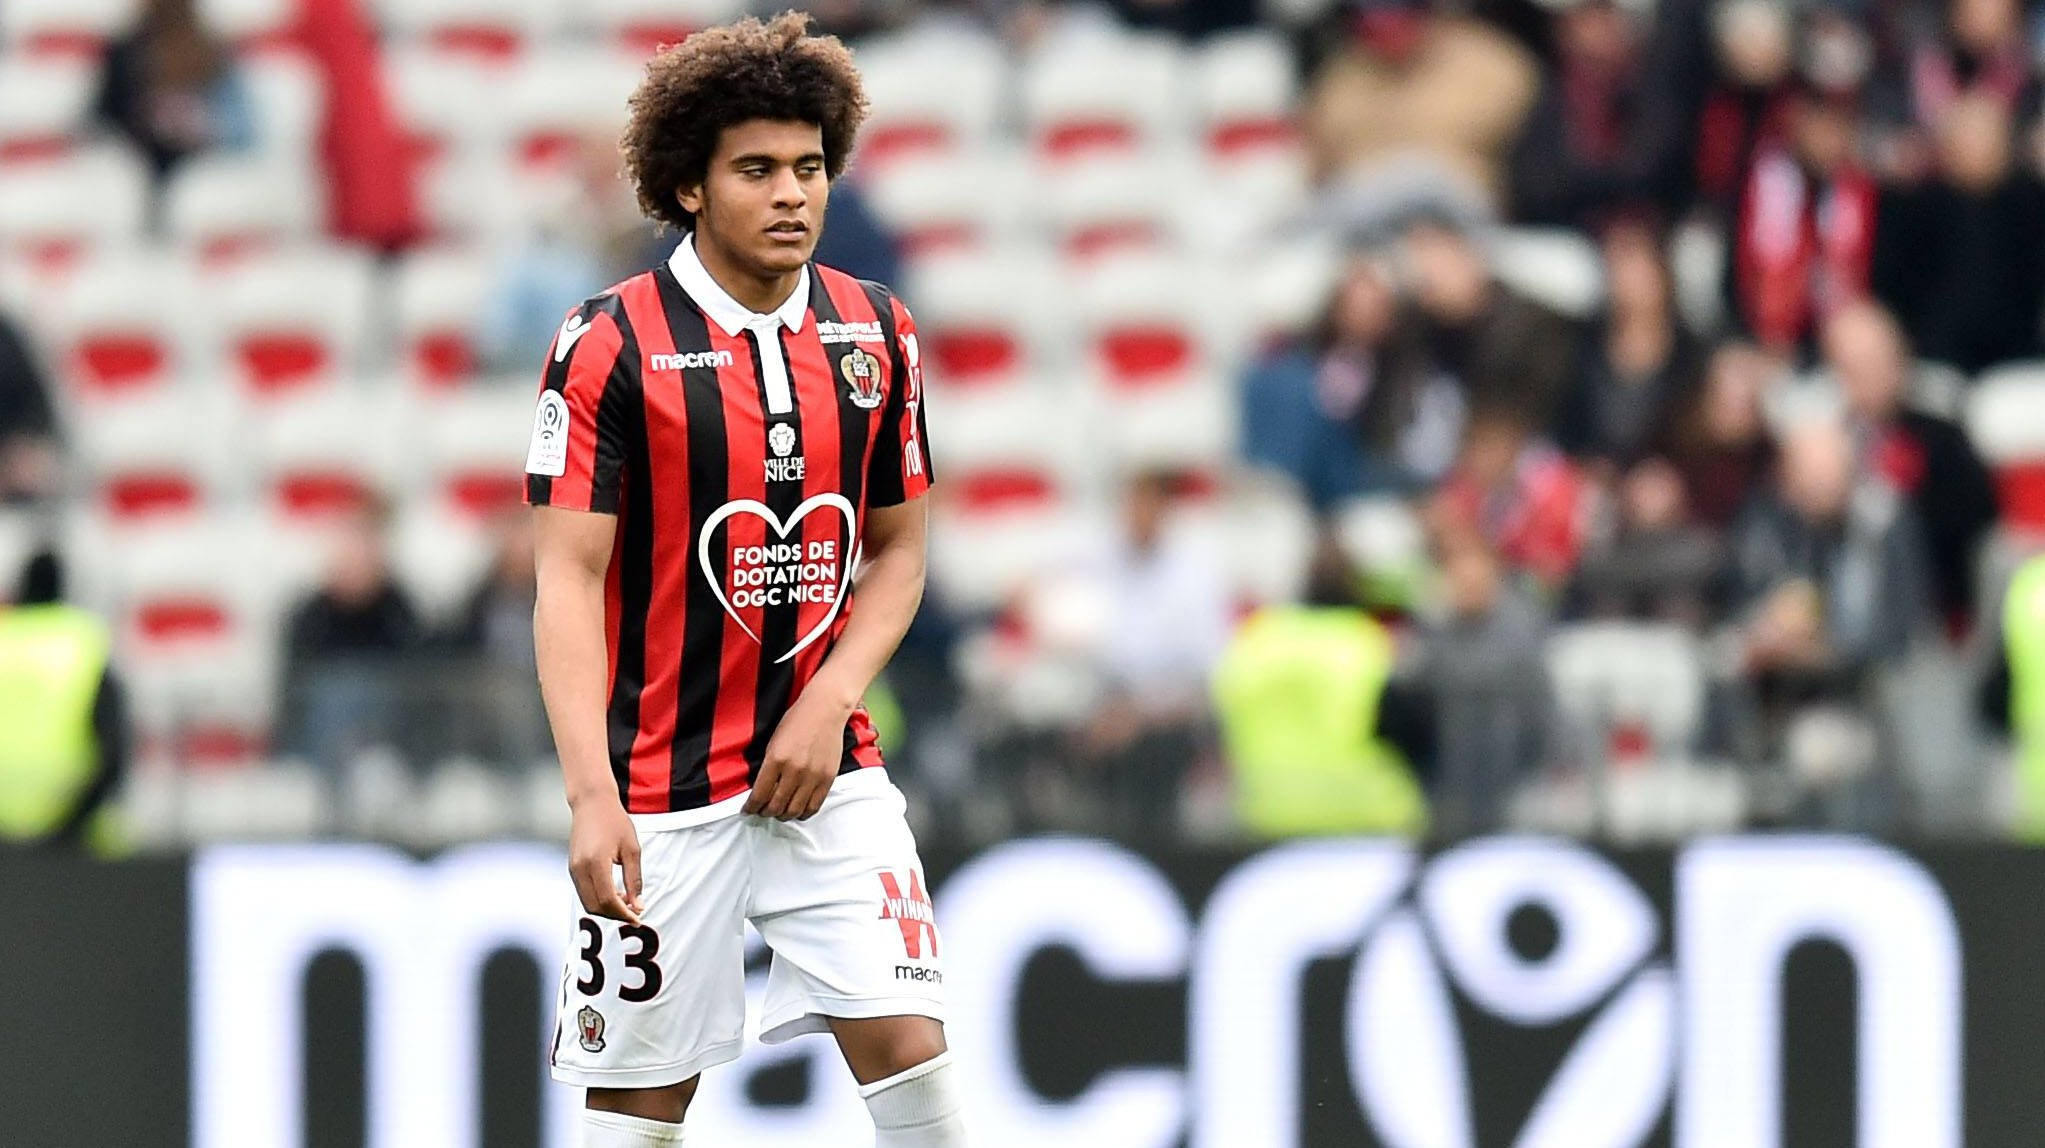 OGC Nice dismiss watch thief Diaby-Fadiga - contract with FC? |